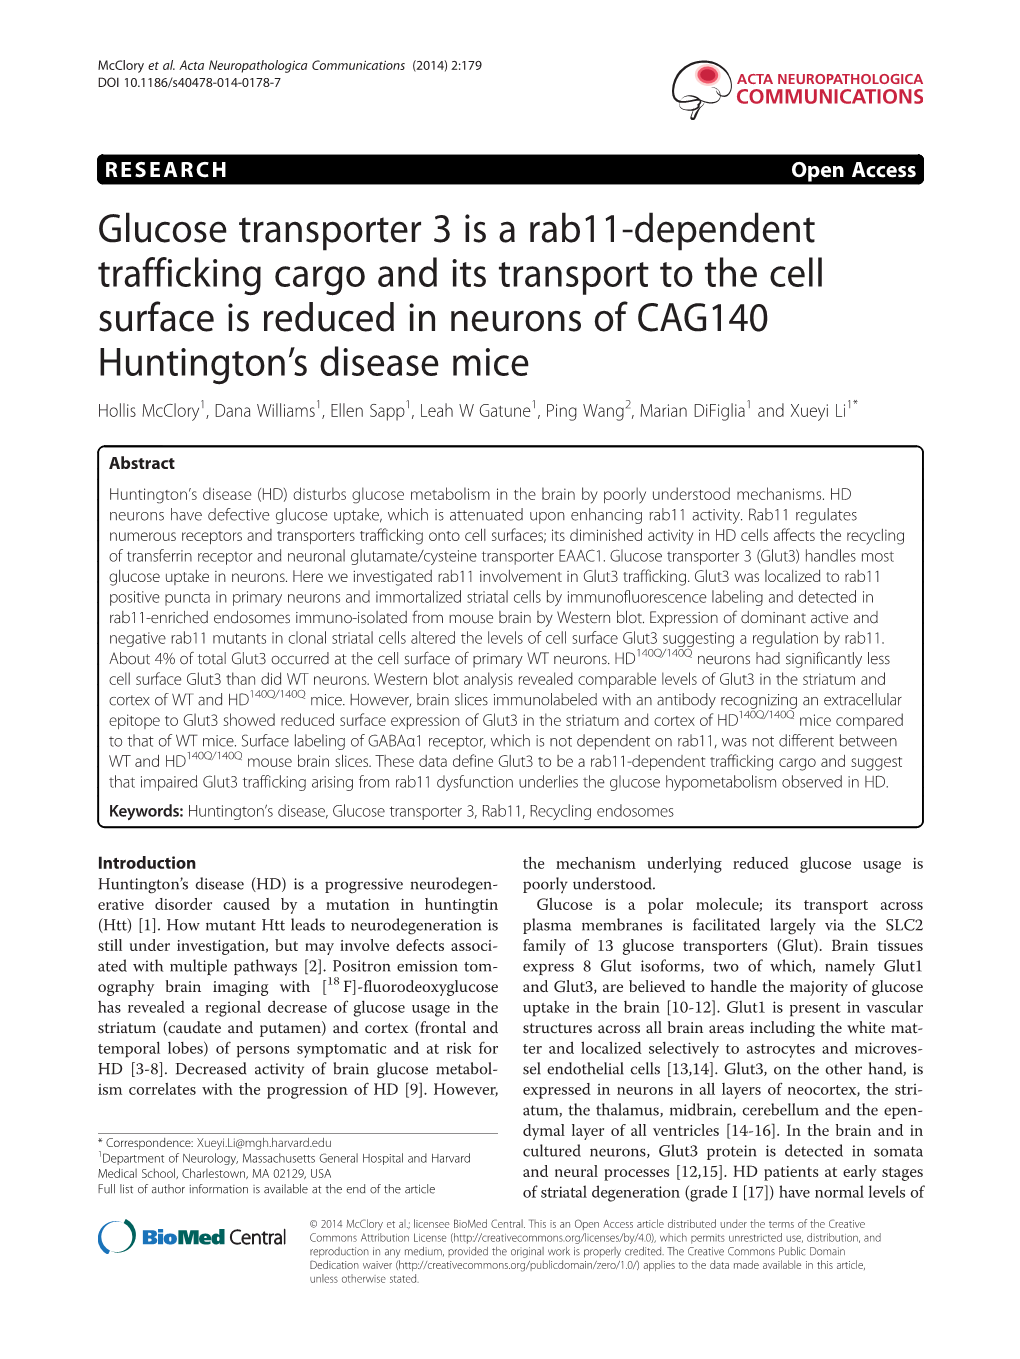 Glucose Transporter 3 Is a Rab11-Dependent Trafficking Cargo